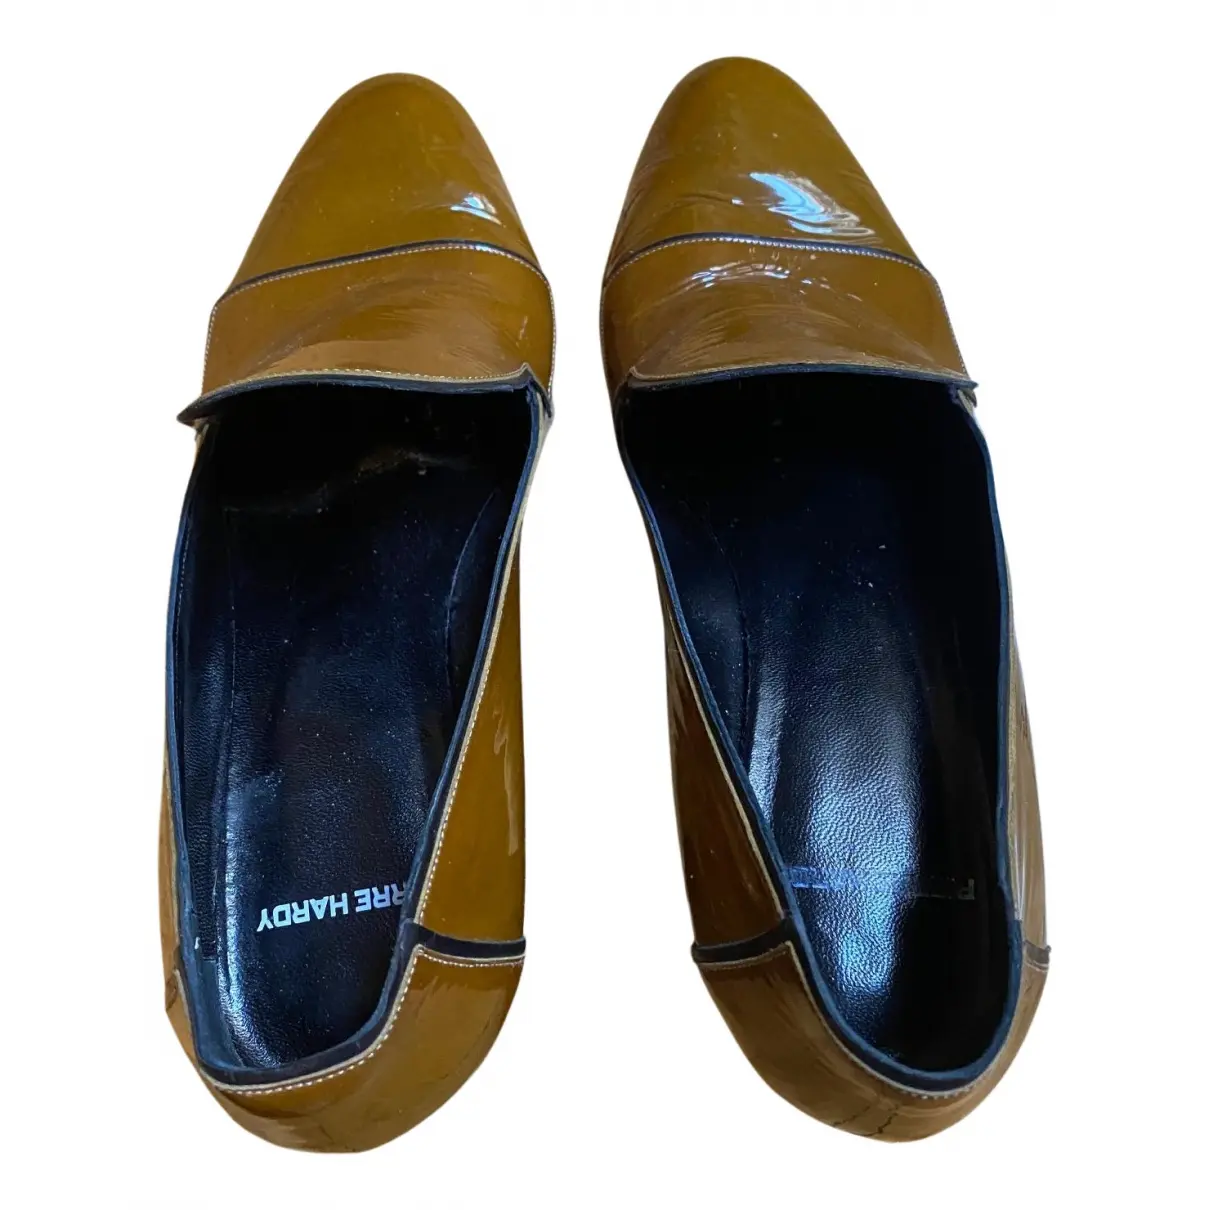 Patent leather flats Pierre Hardy